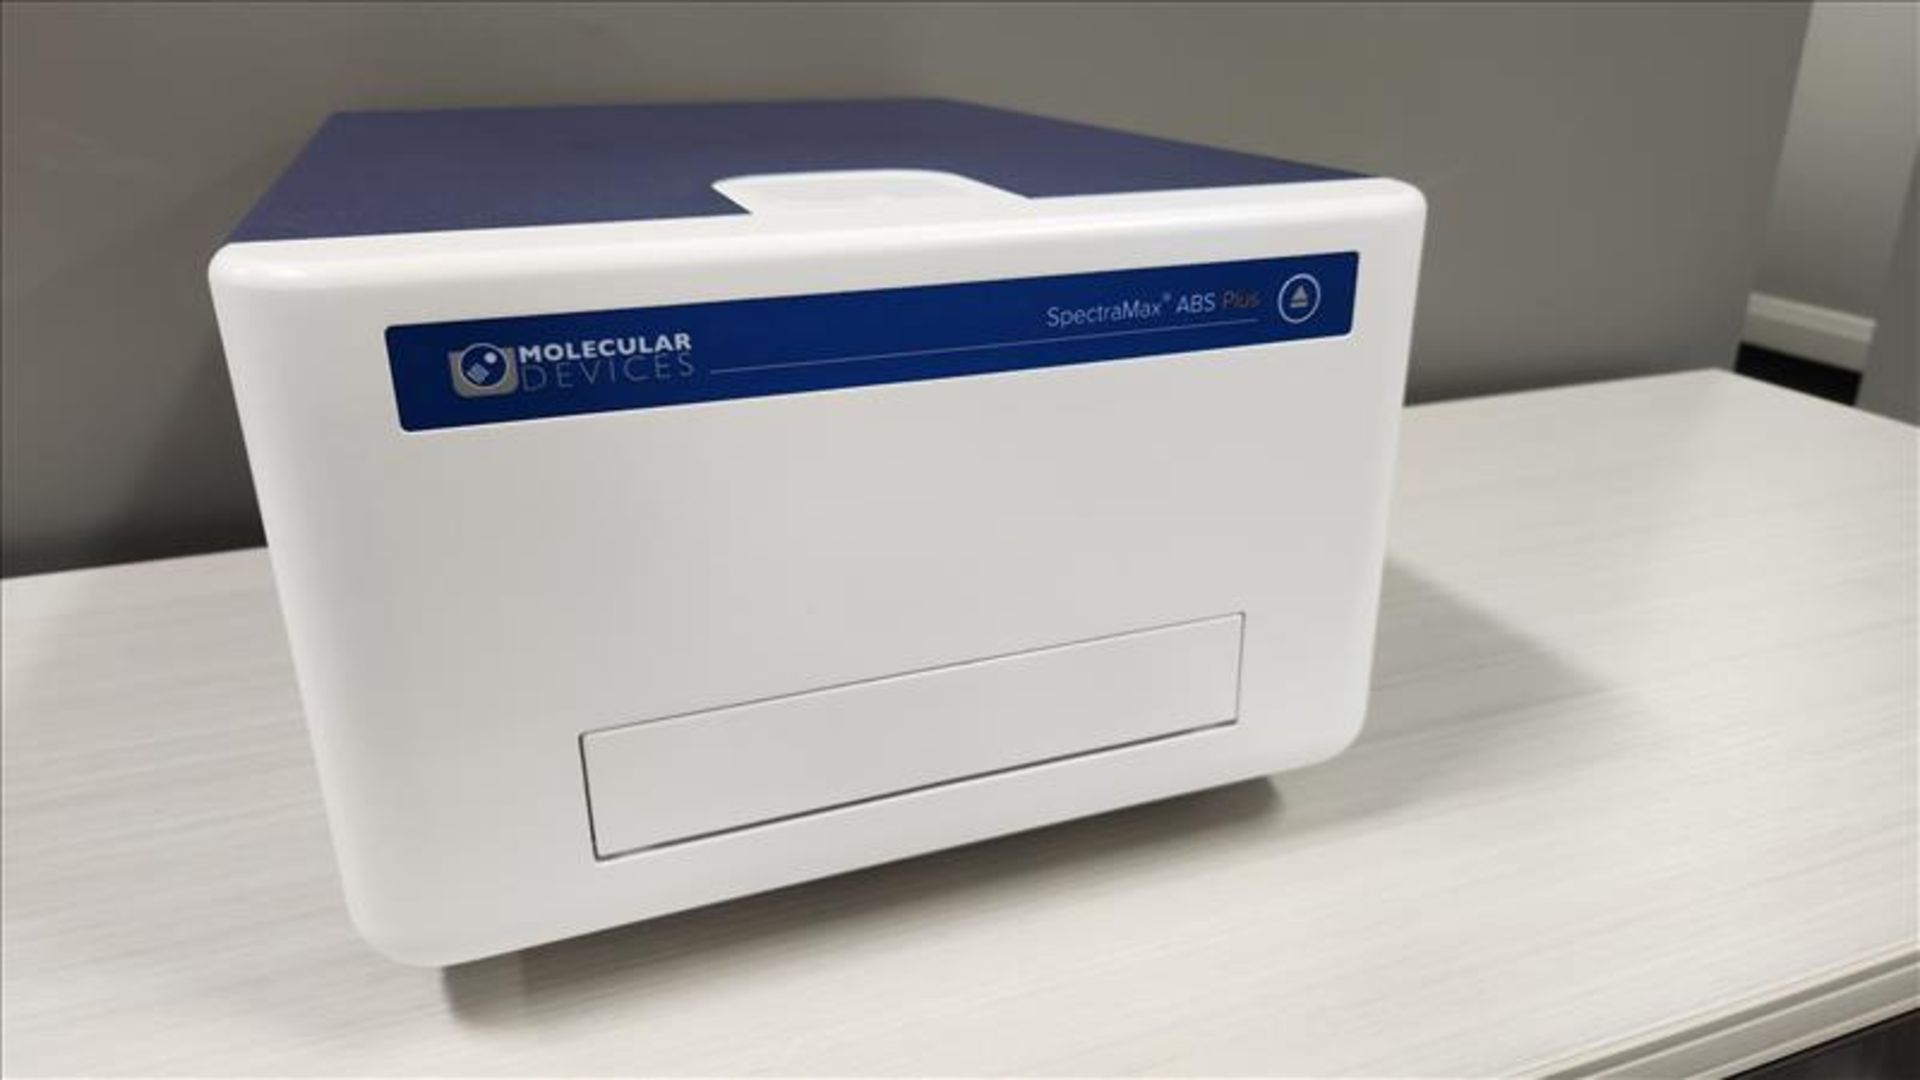 Molecular Devices SpectraMax ABS Plus Absorbance Microplate Reader, S/N ABP01300 with SoftMax Pro - Image 2 of 15